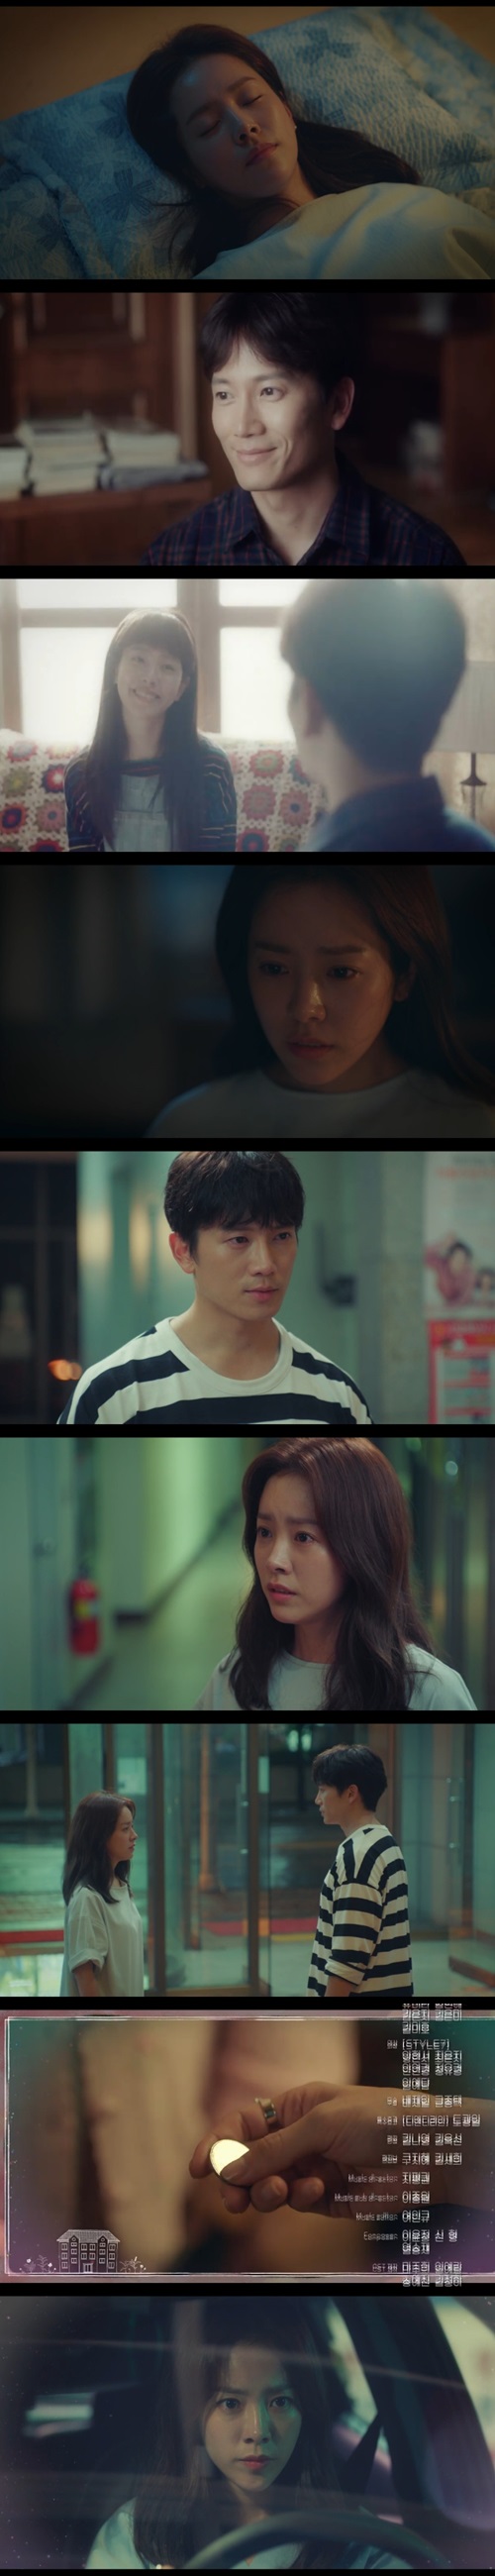 Han Ji-min foreshadowed the Journey to the Center of Time on Ji Sungs Truth Confessions.In the 11th episode of TVNs tree drama Knowing Wife (played by Yang Hee-seung/directed Lee Sang-yeop), which aired on September 5, Cha Ju-hyuk (Ji Sung) confessed the truth to Seo Woo Jin (Han Ji-min).Seo Woo Jin said, Every time I was struggling, the deputy was next to me.One thing Im sure is that I like you. I love you, said Cha Ju-hyuk, though he kissed her.We are not, he said, leaving Seo Woo Jin alone.Cha Ju-hyuk Seo Woo Jin, who met at the bank the next day, did not know what to do, and Seo Woo Jin told Yun Jong-hoo (Jang Seung-jo) I have something to say after work.Yoon Jong-hoo told Cha Ju-hyuk, We have decided to meet for a month, but I feel bad.I was worried that it would not be, and I met Seo Woo Jin and deliberately took time to say, Lets eat and talk, but at the end, Seo Woo Jin said, It is not yet a month, but I do not think I will meet again.I know from my head that you are a good person, but my heart keeps going to the wrong place. Yoon Jong-hoo pretended to be unscathed, but he started to feel sick about the wound of the broken heart, and he accidentally overheard the conversation between Cha Ju-hyuk and Seo Woo Jin and was angry to know the kiss of the two.Yoon Jong-hoo punched Cha Ju-hyuk, and Oh Sang-sik (Oh Ui-sik), who learned about their triangle through Cha Ju-eun (Park Hee-bong), kicked Cha Ju-hyuk.In addition to his divorce from his first love Lee Hye-won (Ganghanna), Cha Ju-hyuk also hurt his two friends, Yoon Jong-hoo Oh Sang-sik, and failed to join Journey to the Center of Time. Cha Ju-hyuk applied for a move to Daejeon, and spent the last time with Seo Woo Jin.Cha Ju-hyuk went to his alma mater, where he often met with Seo Woo Jin in the past, and that night, Seo Woo Jin saw Cha Ju-hyuks face in his dreams.Seo Woo Jin visited Cha Ju-hyuk late at night and said, I can not wait until morning. I have dreams that I always dream repeatedly.Im dating someone, marrying someone, having a child, and getting angry, and I cant tell if this is my past life or who the man is, but it was the man Ive just dreamed of, Cha Dae-ri.I dont know what you know, and its strange that you know my home, my habits, he said.Cha Ju-hyuk said, We were a couple, Woo Jin-a. And Seo Woo Jin said, What?It was a couple, we, he said.A trailer that followed Cha Ju-hyuks shocking ending of Confessions of Journey to the Center of Time to Seo Woo Jin was shown Seo Woo Jin taking a 500-won coin essential for Journey to the Center of Time to his mother and heading to the tollgate.Yoo Gyeong-sang